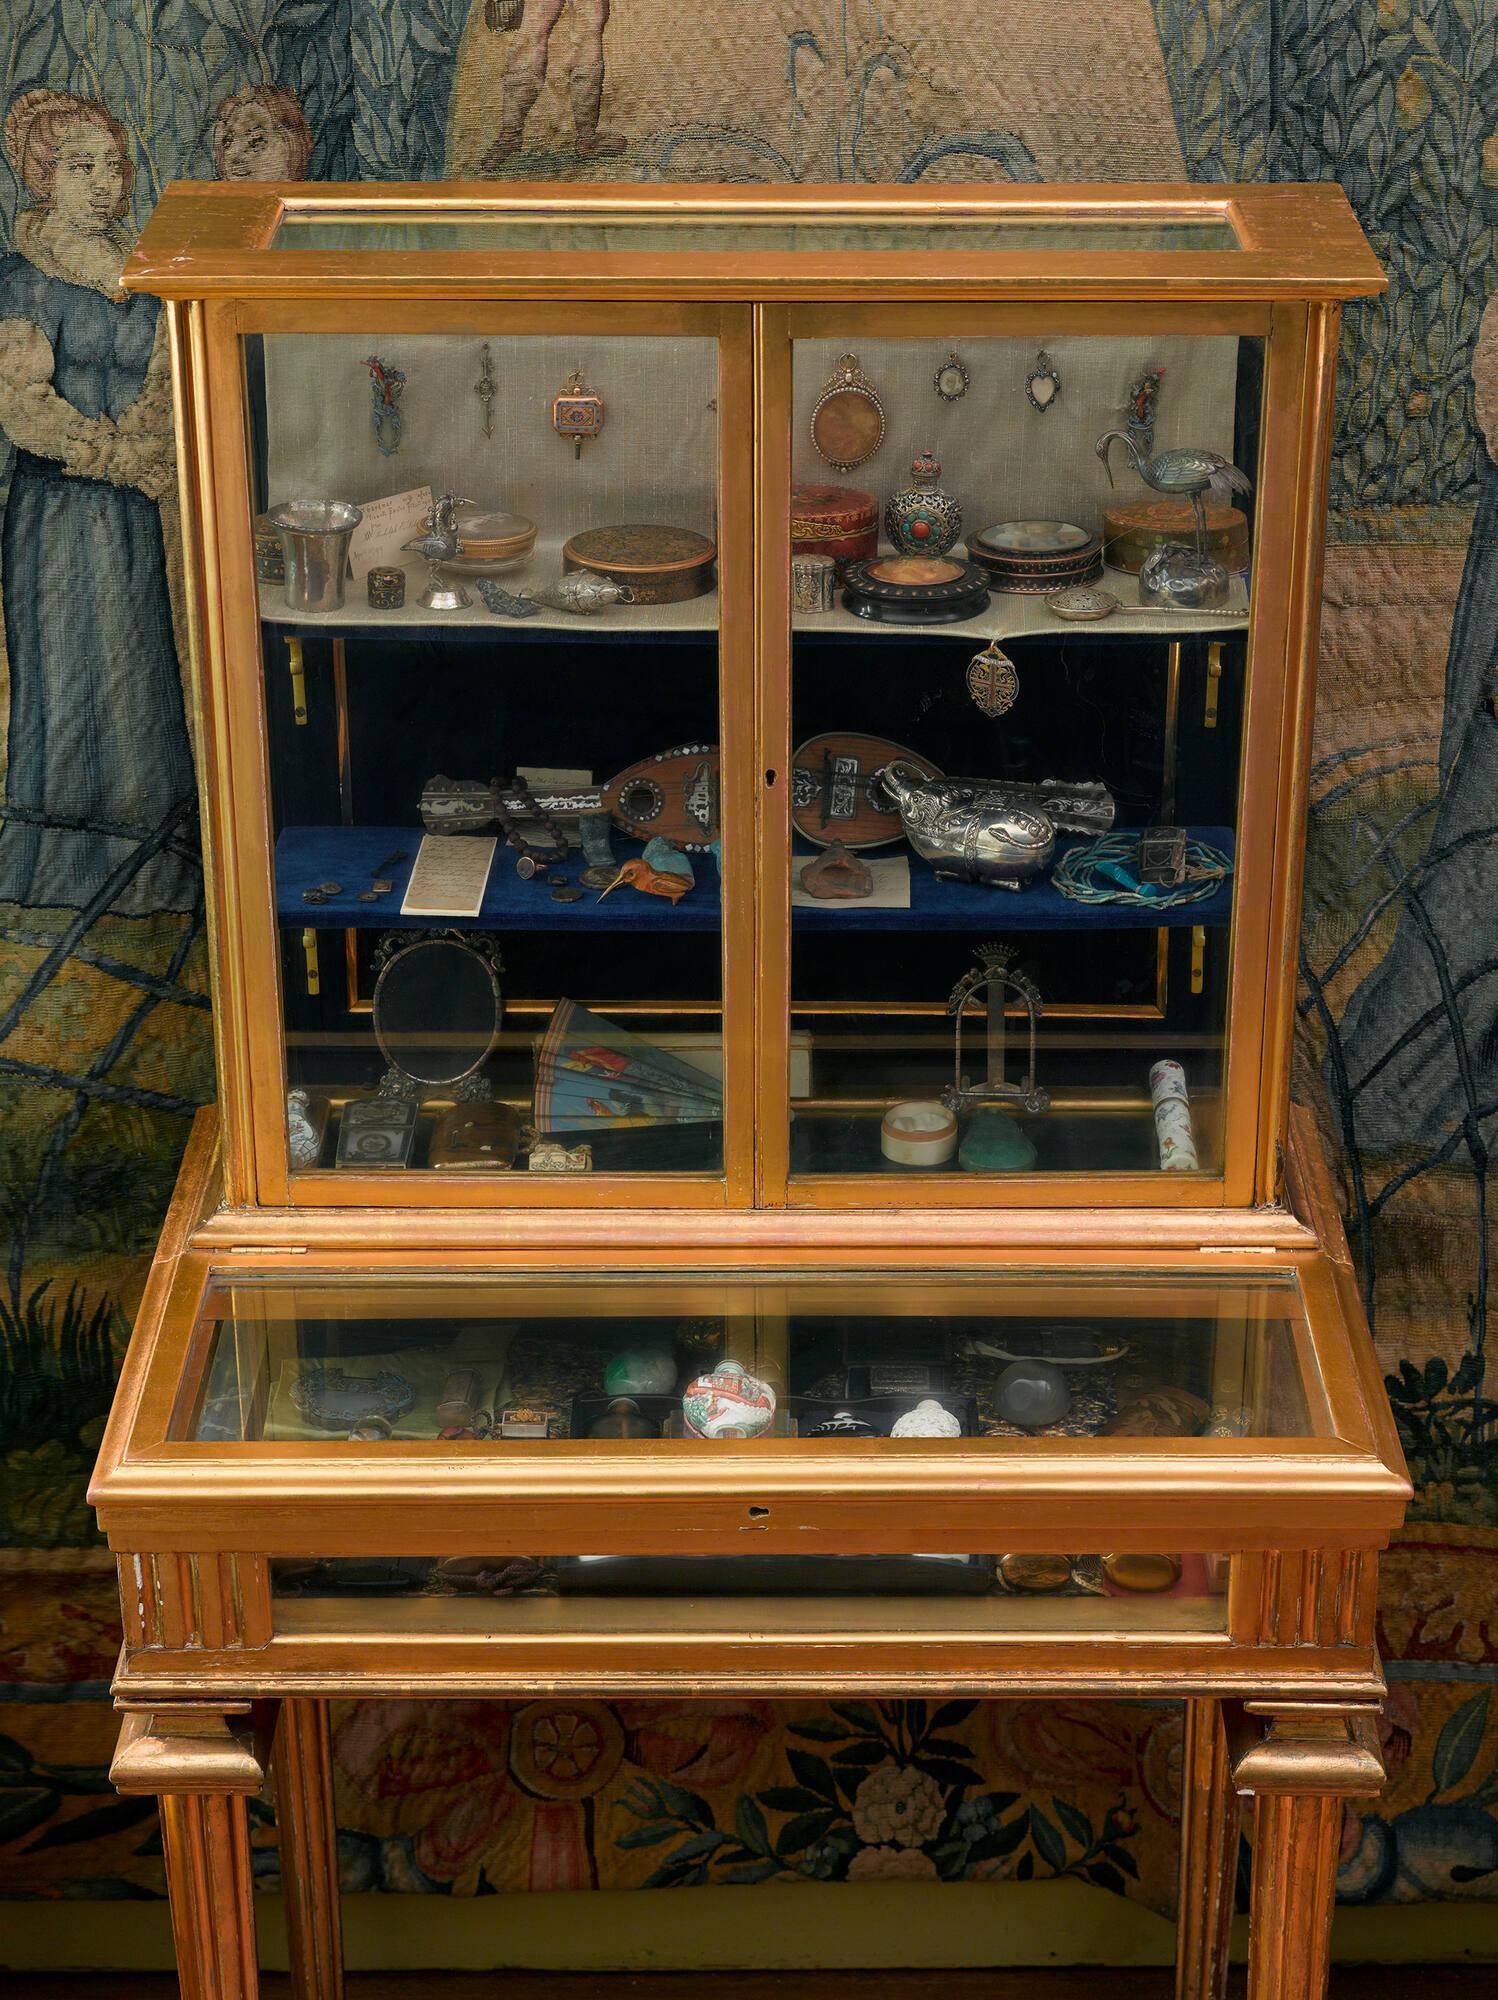 Glass Chest with objects inside.